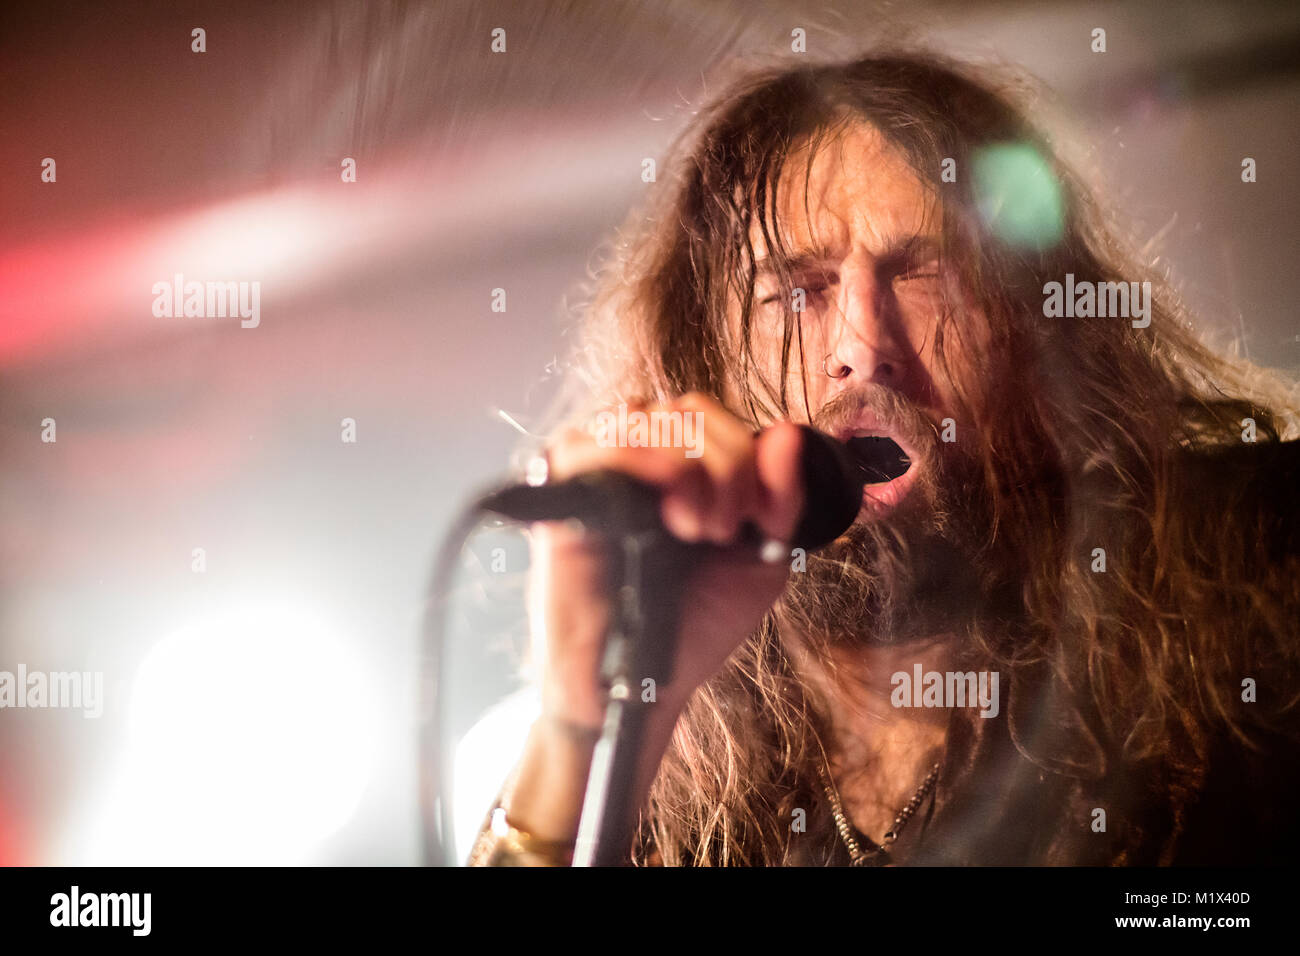 The American hard rock band Scorpion Child performs live at Garage in Bergen. Here vocalist Aryn Jonathan Black is seen live on stage. Norway, 07/03 2016. Stock Photo